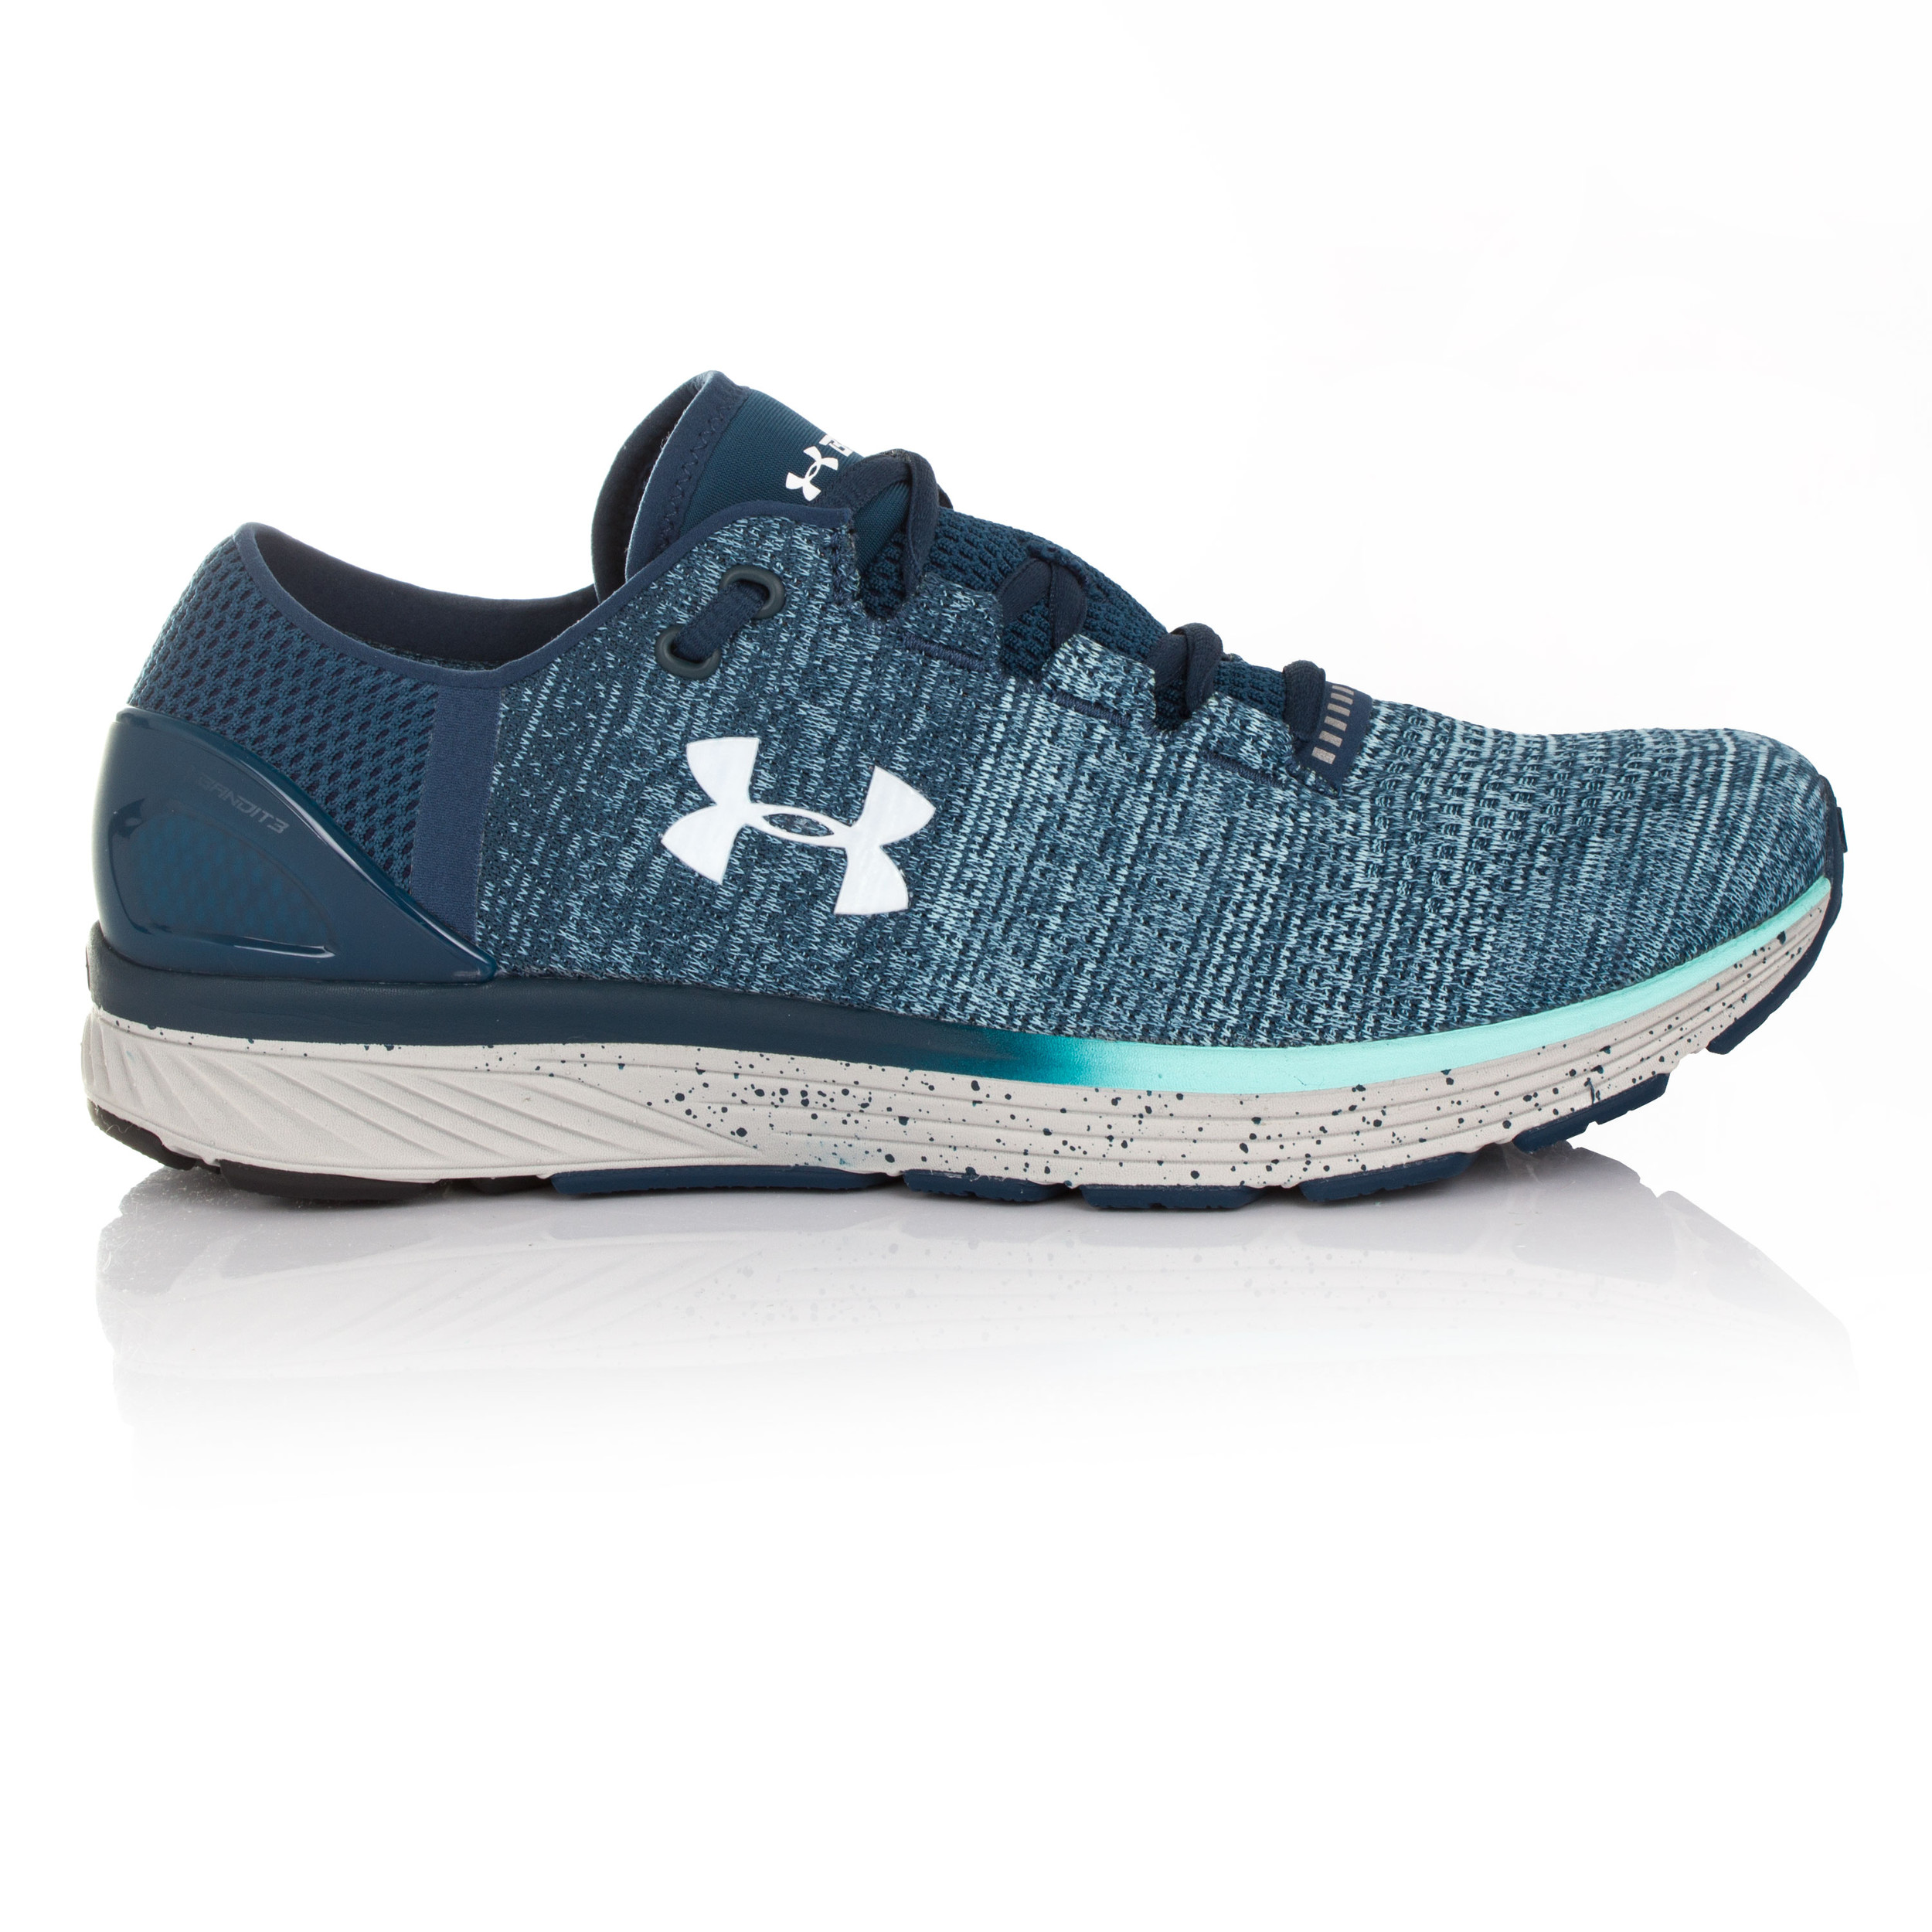 Under Armour Charged Bandit 3 zapatillas de running para mujer - AW17